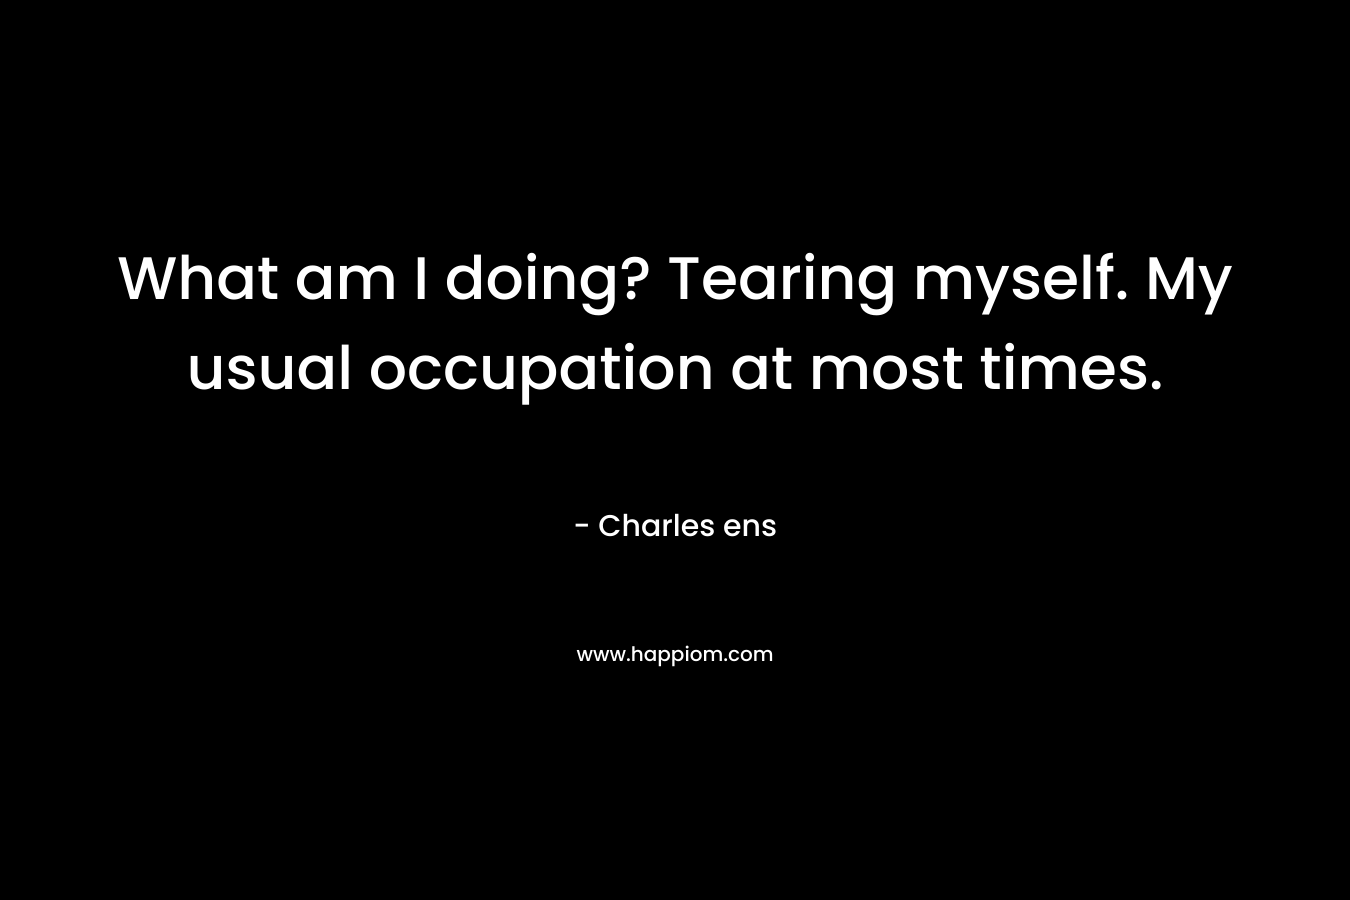 What am I doing? Tearing myself. My usual occupation at most times. – Charles ens